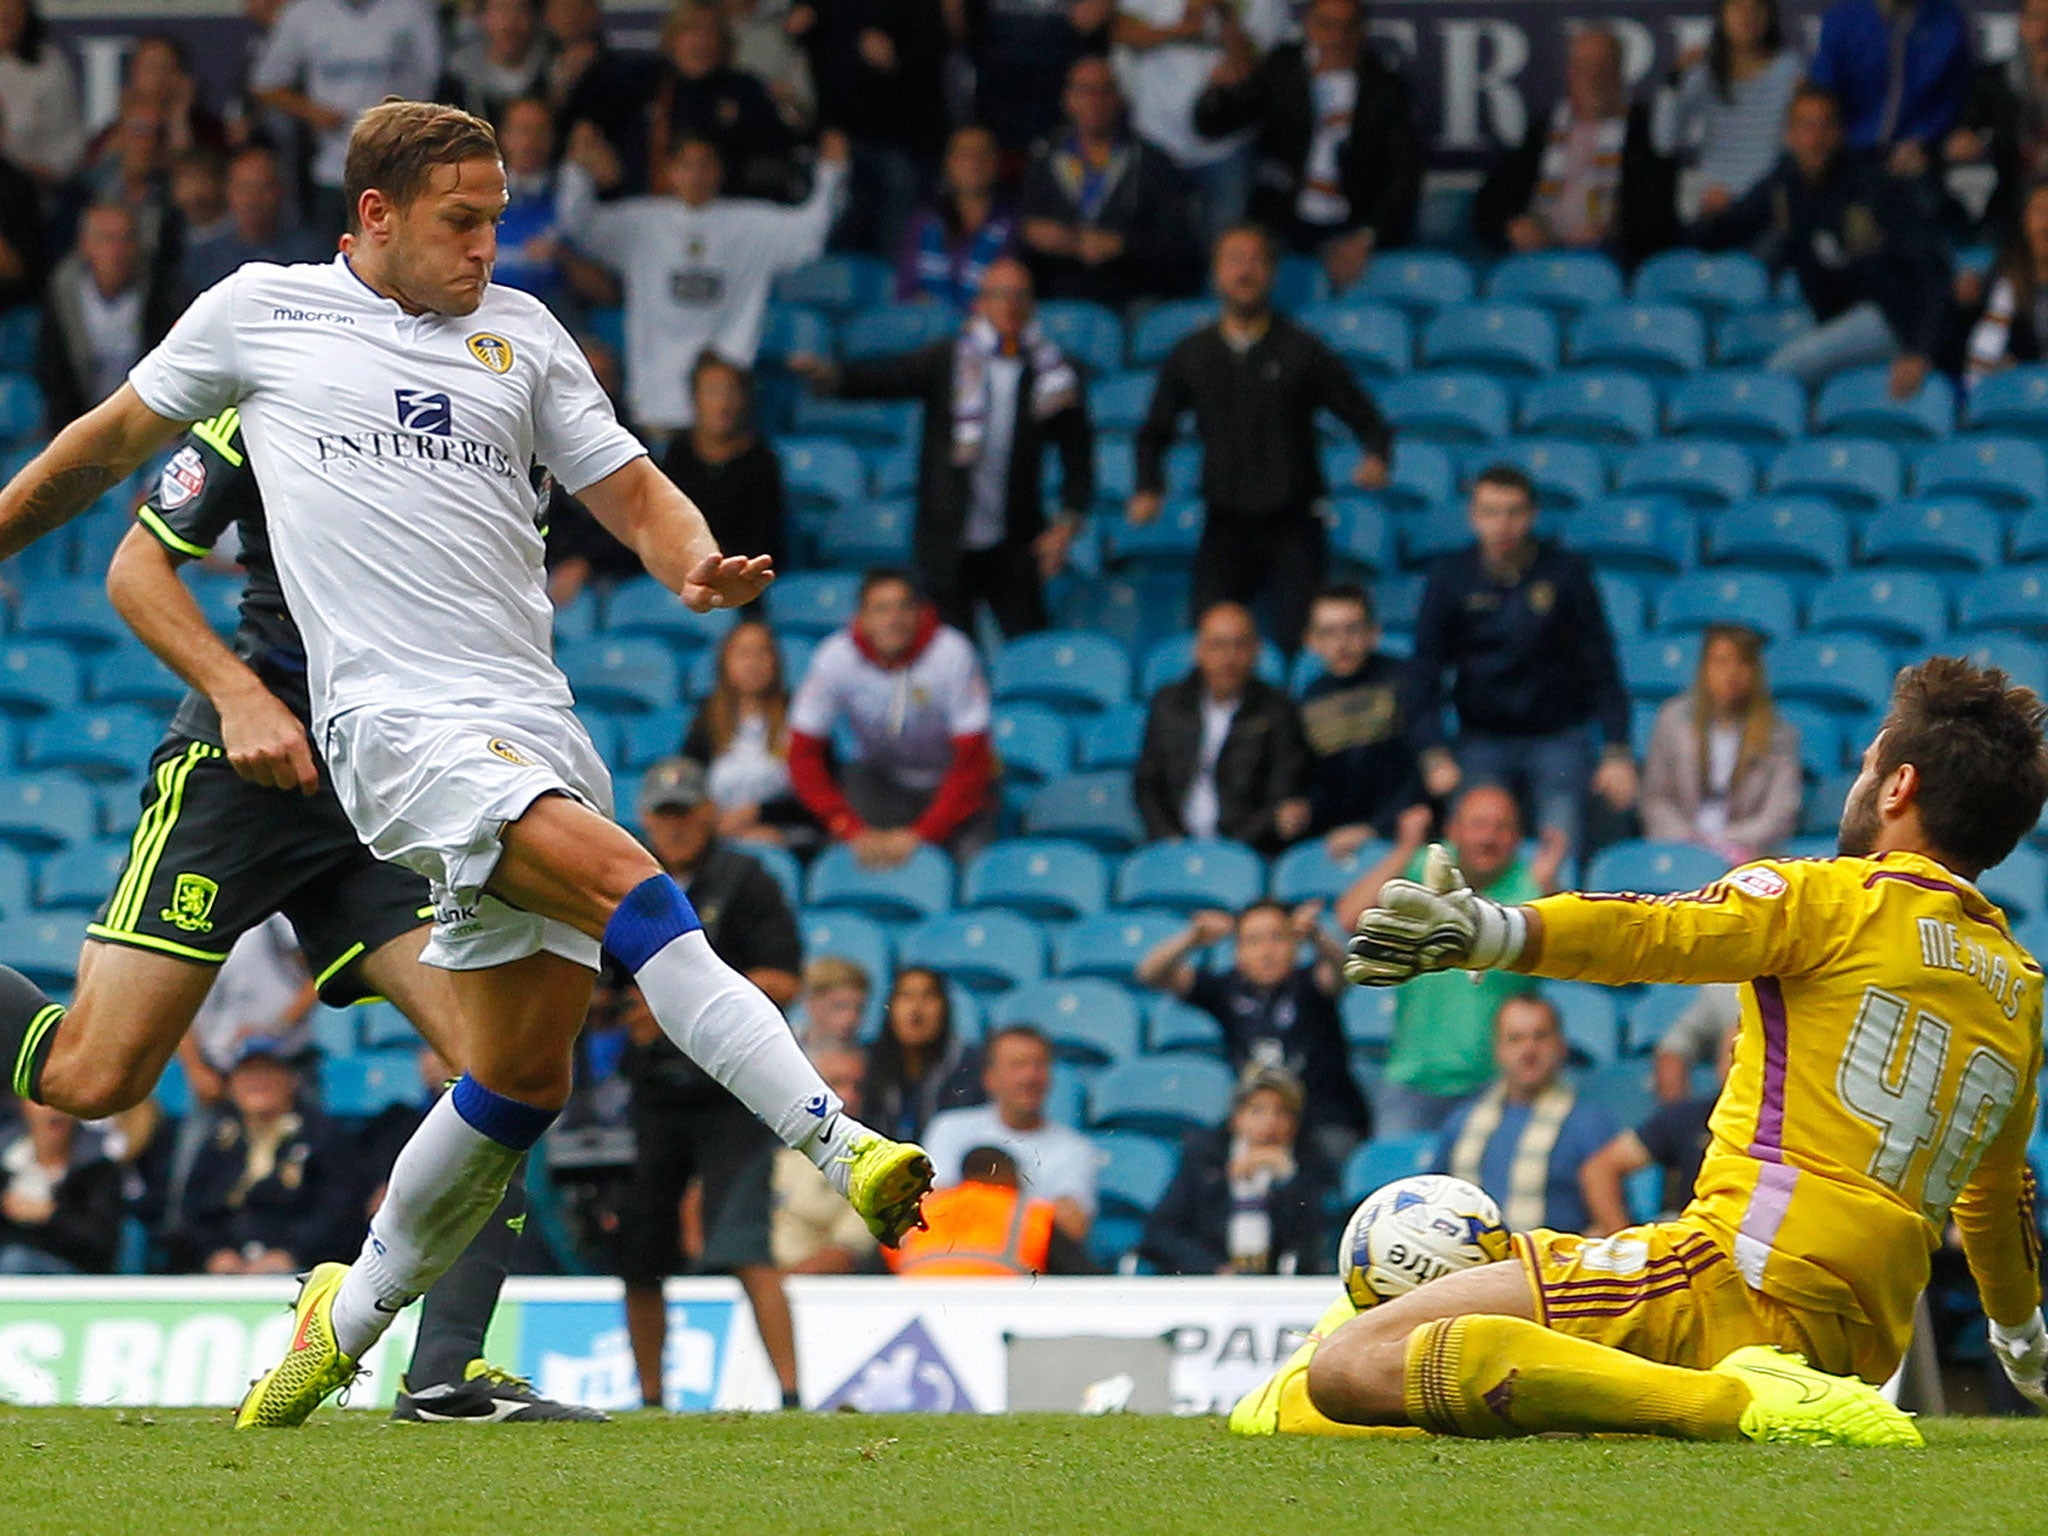 Billy Sharp scored on his debut as Leeds beat Middlesbrough 1-0